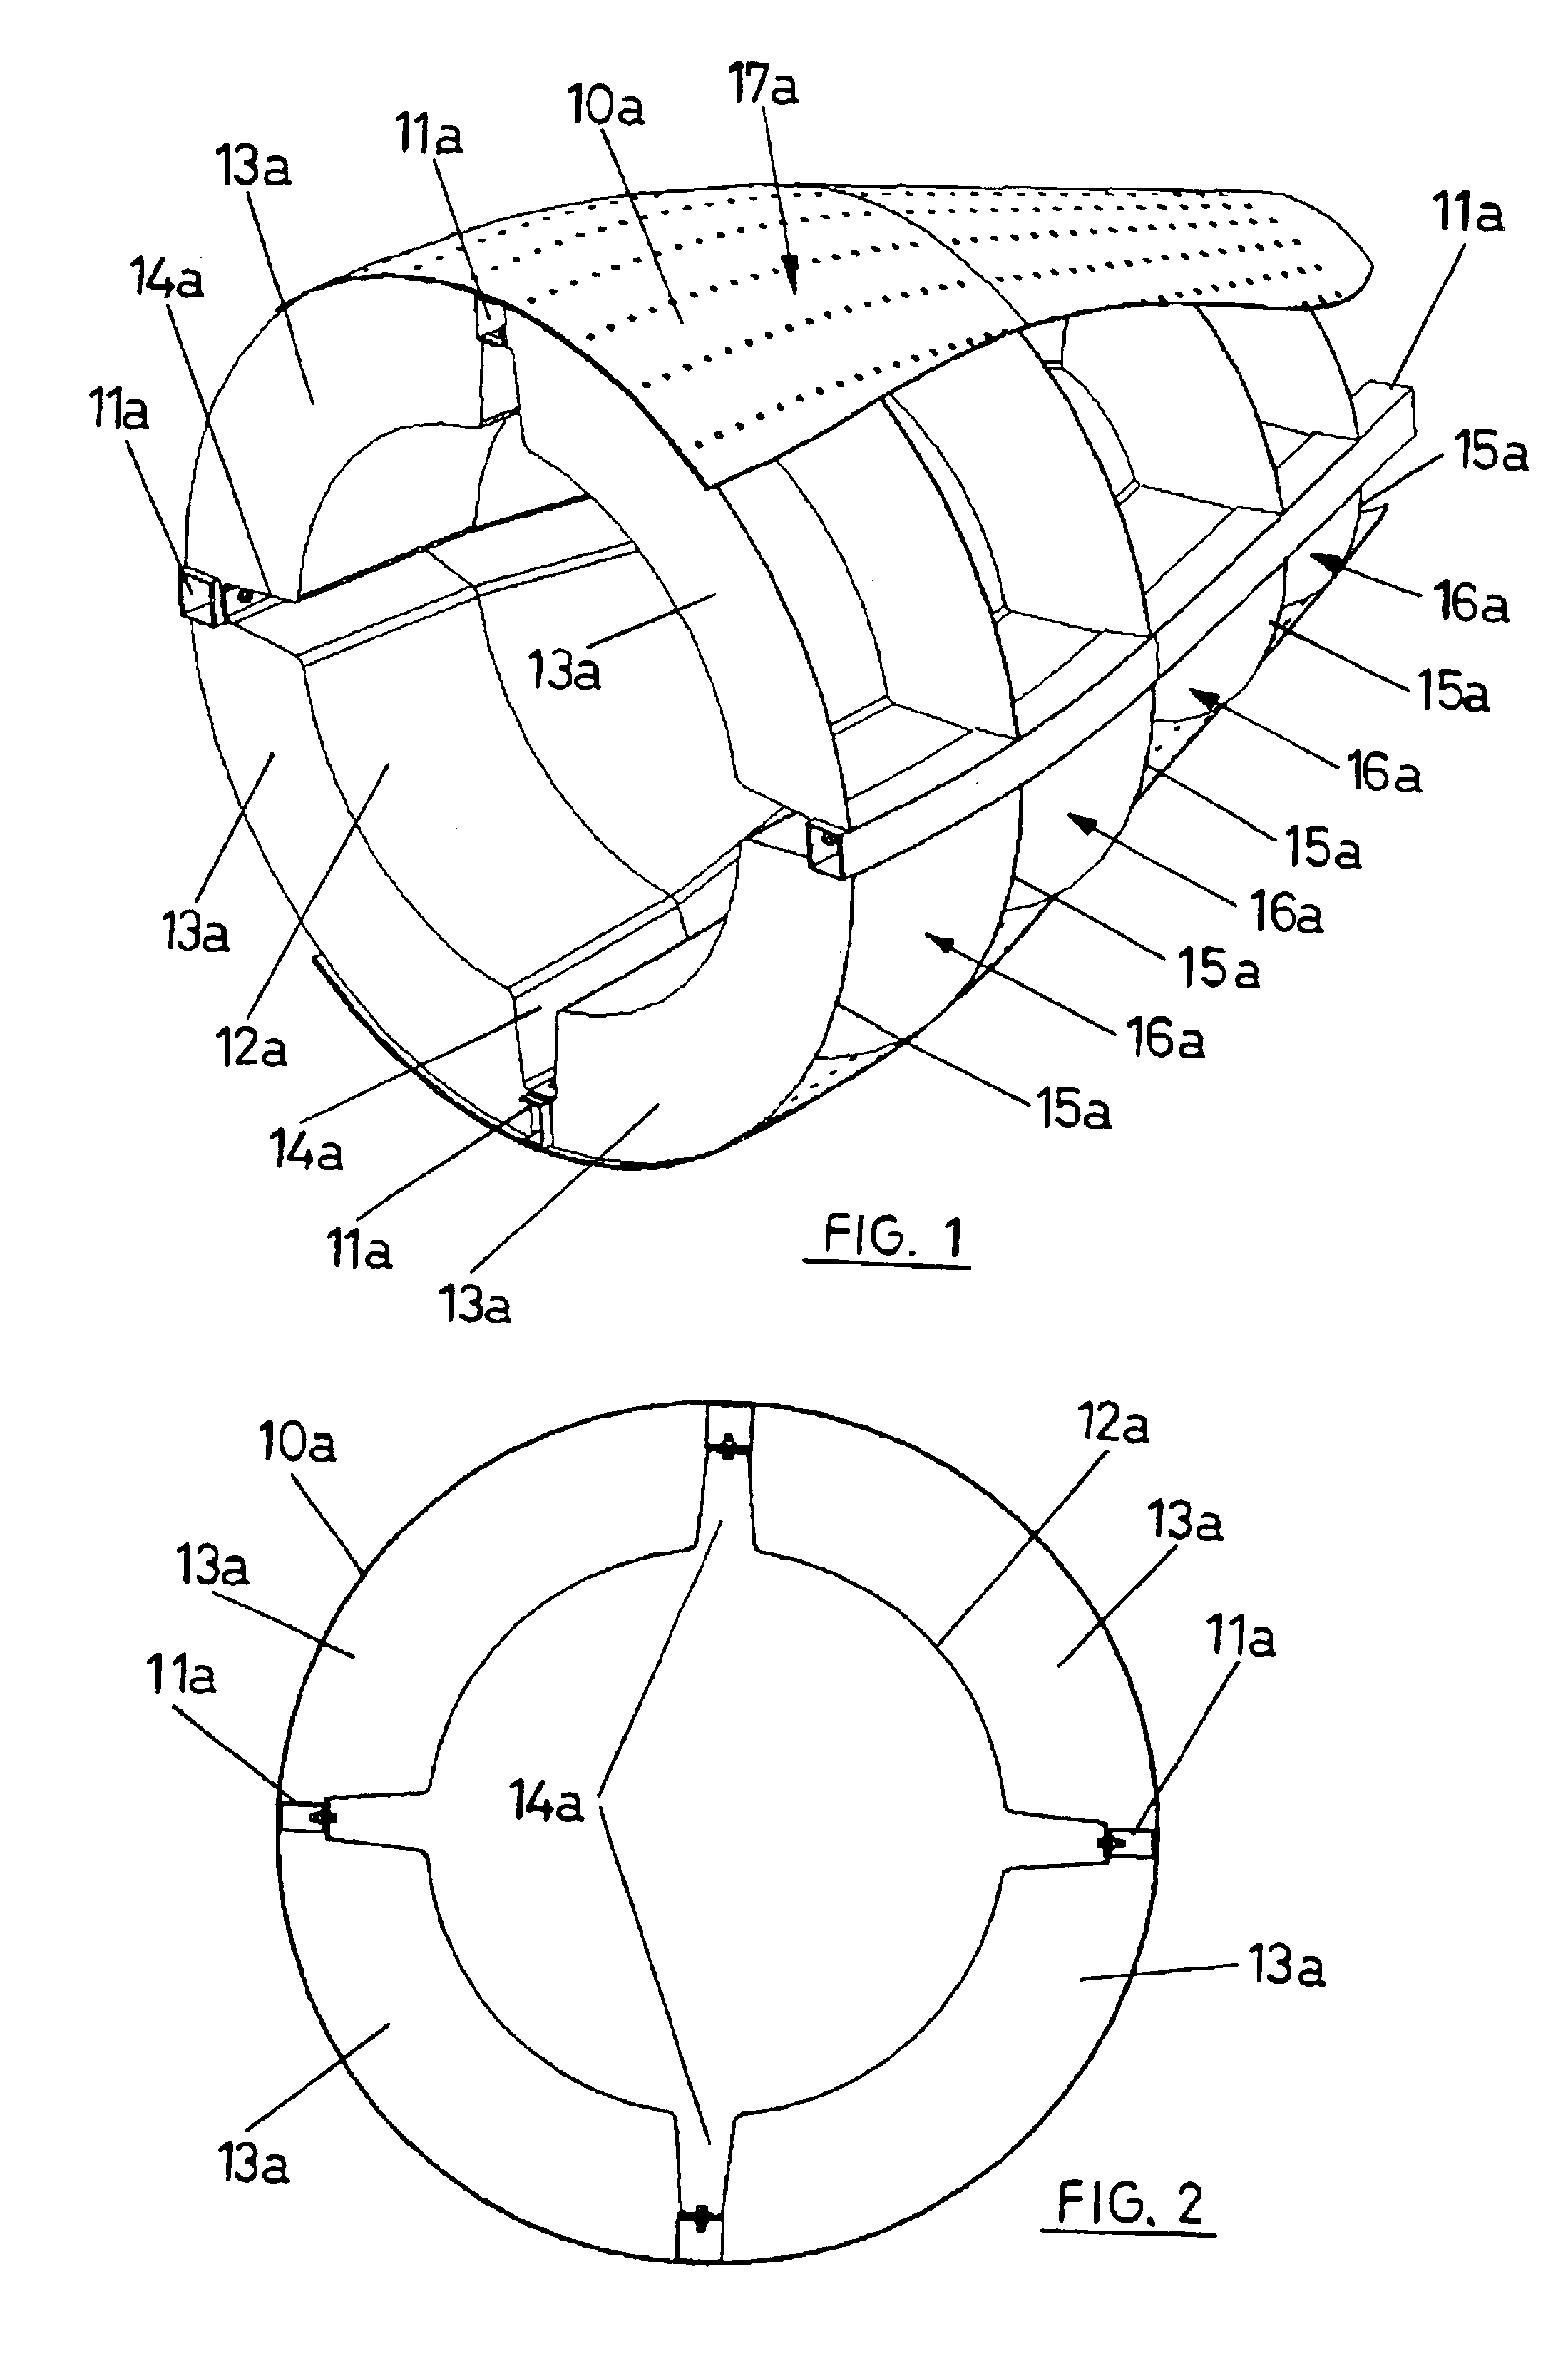 Noise reduction conduit for static components in aircraft engines